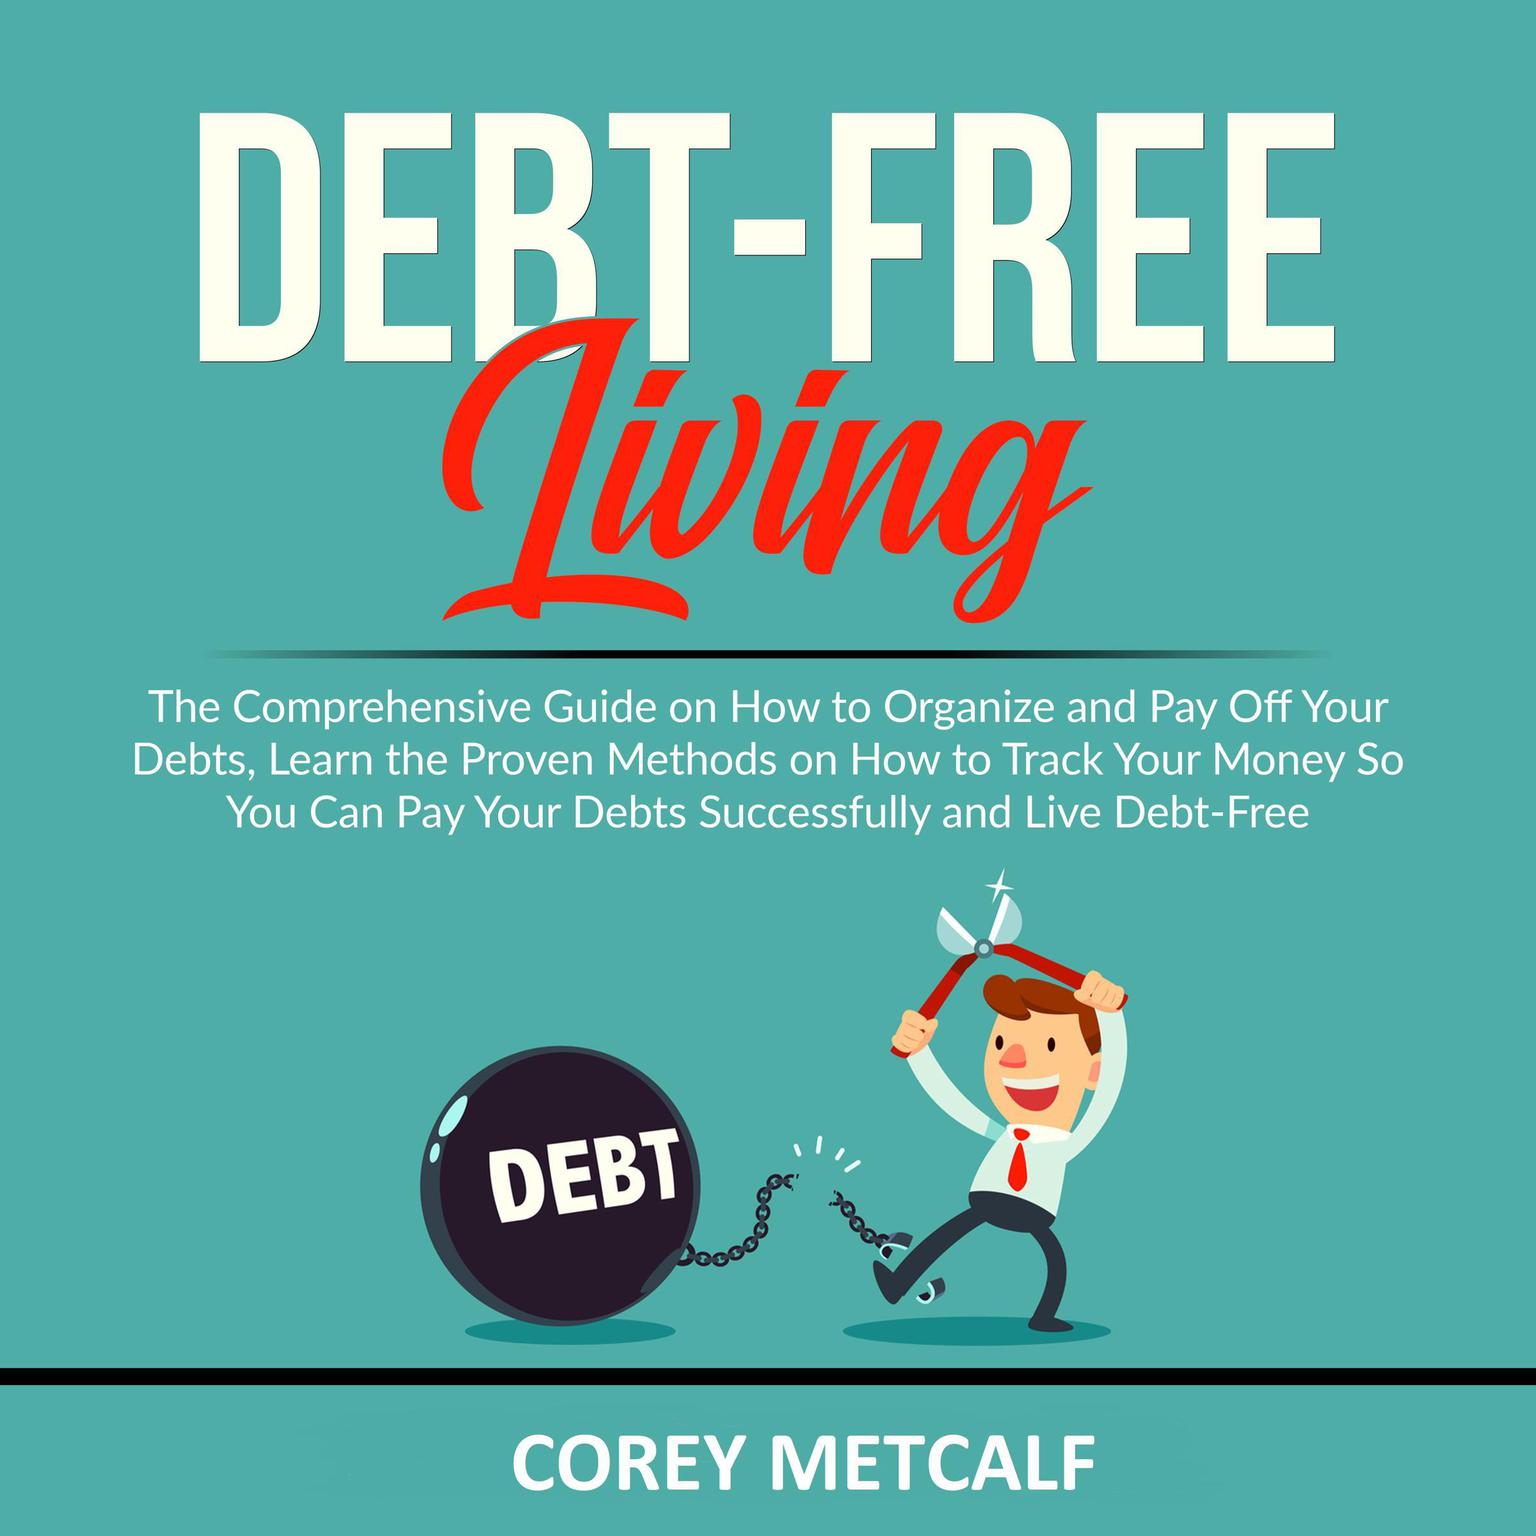 Debt-Free Living: The Comprehensive Guide on How to Organize and Pay Off Your Debts, Learn the Proven Methods on How to Track Your Money So You Can Pay Your Debts Successfully and Live Debt-Free Audiobook, by Corey Metcalf